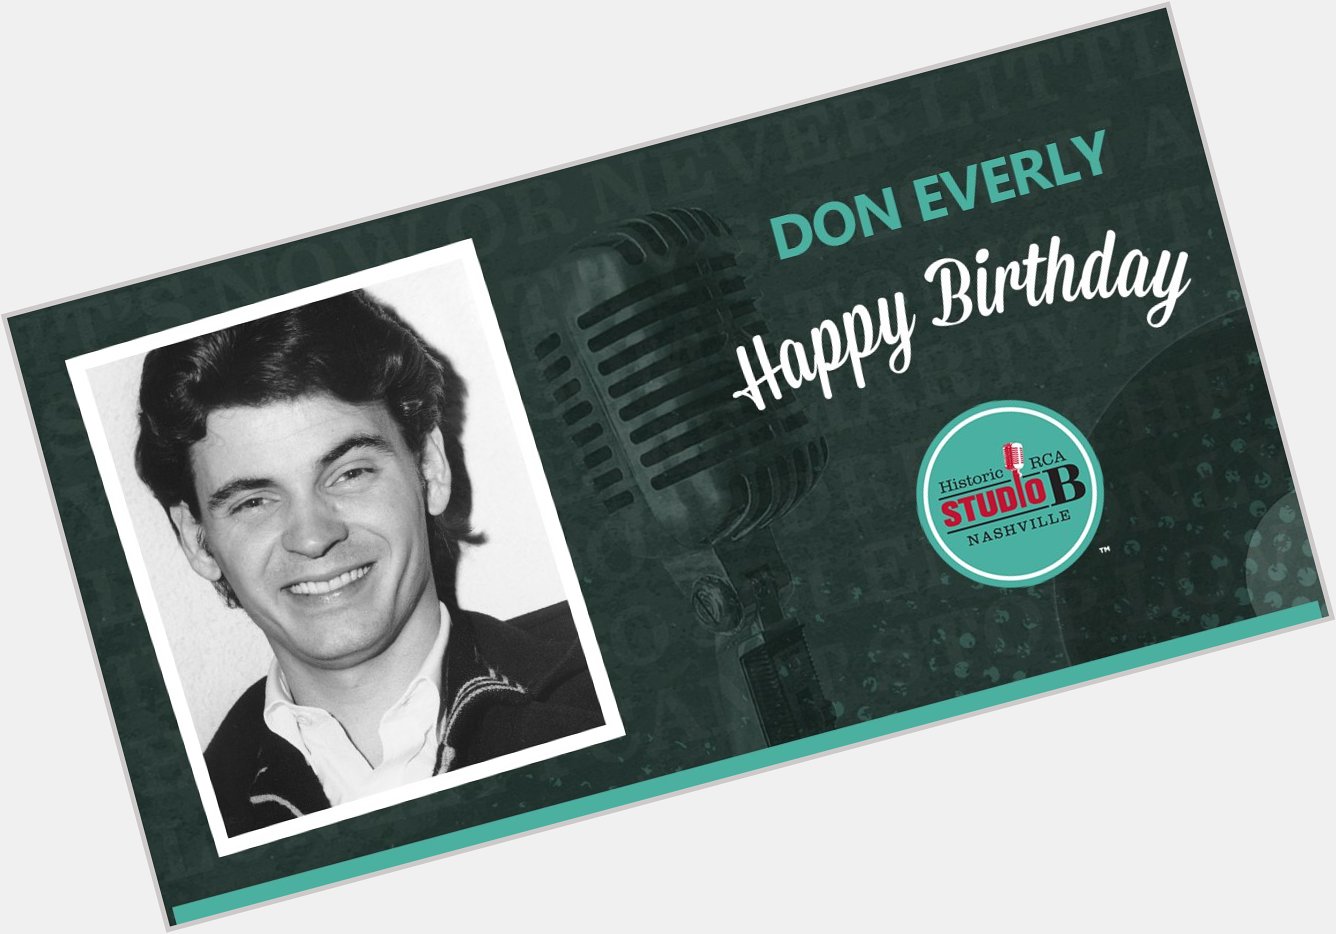 Happy birthday to Don Everly, of Country Music Hall of Fame duo The Everly Brothers! 